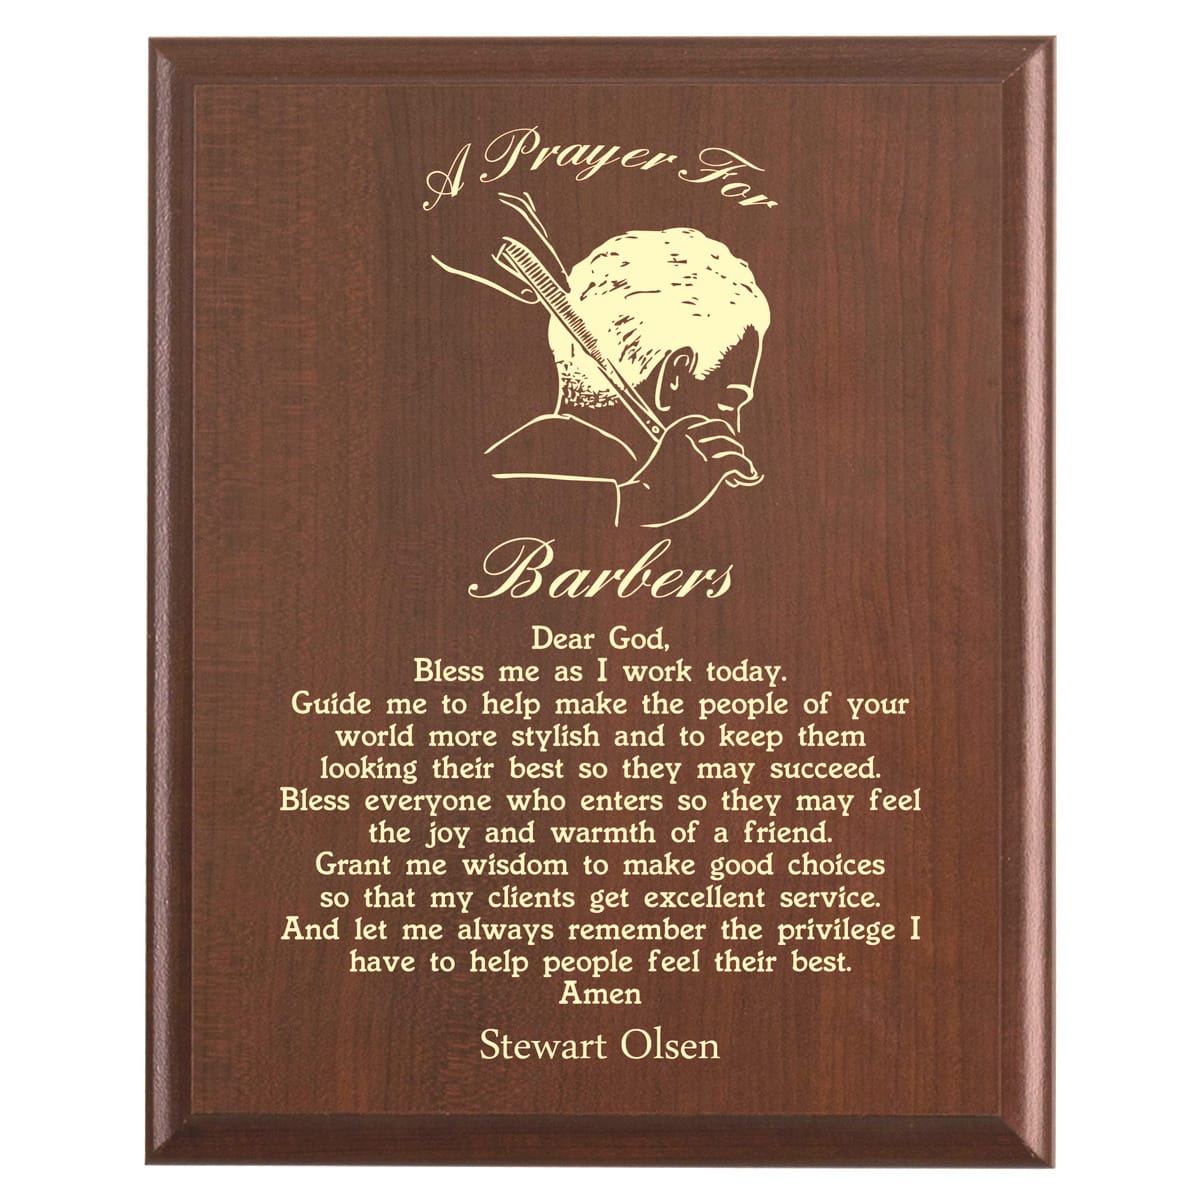 Plaque photo: Barber Prayer Plaque design with free personalization. Wood style finish with customized text.